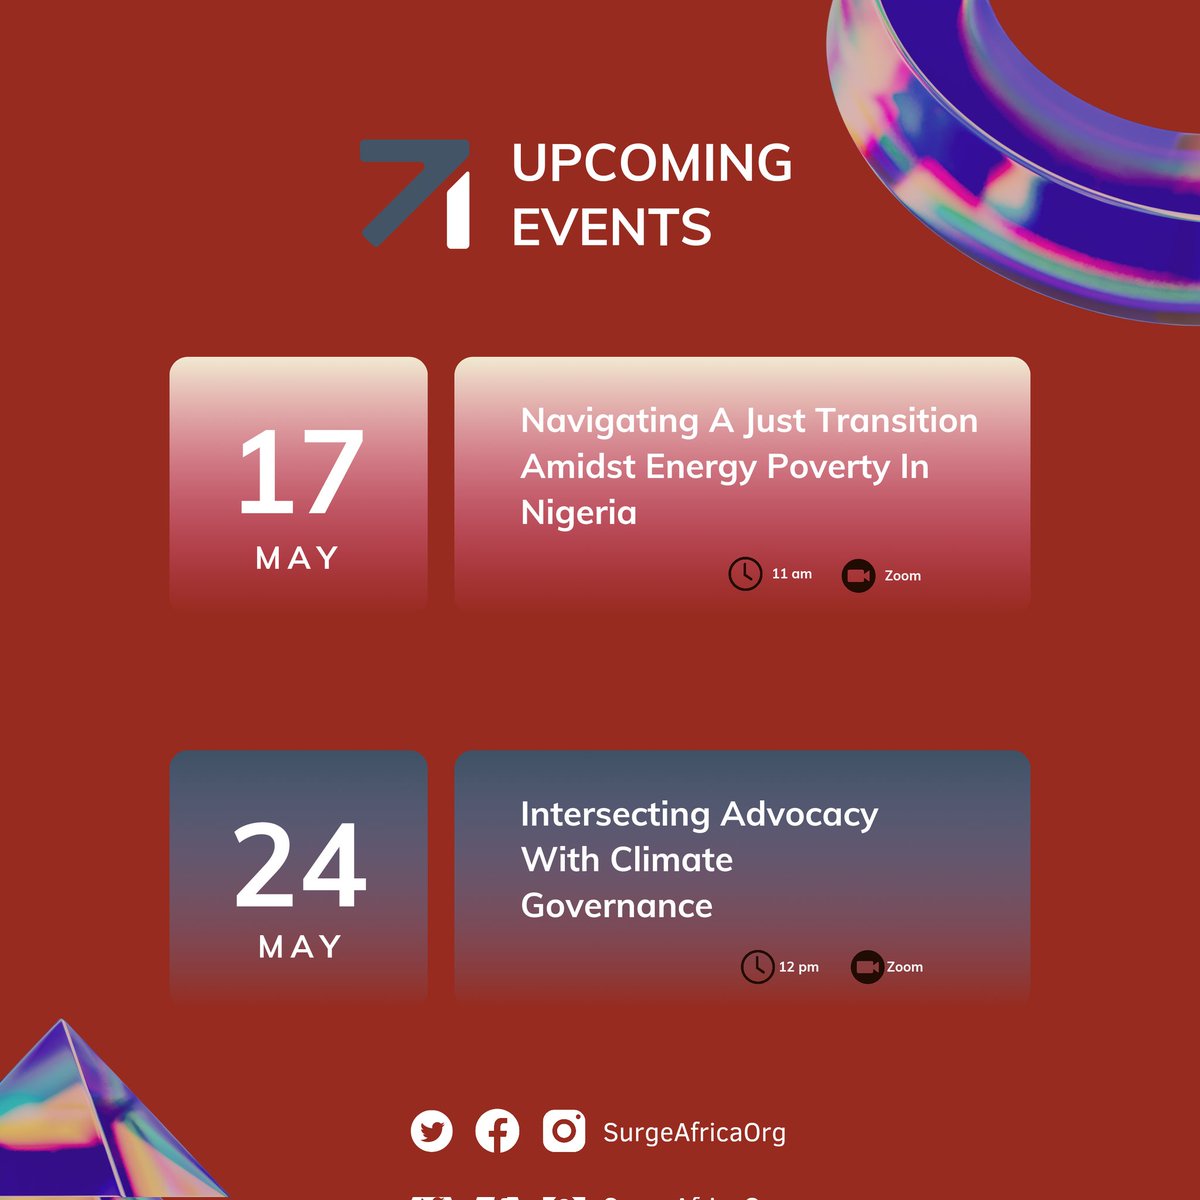 Two out of the three events we will be hosting this month.🗓️
You shouldn’t miss any of it as we will be having notable professionals in the Climate Industry share their insights. 

Register here - linktr.ee/surgeafricaorg 
Retweet to share with others.
#SurgeAfricaOrg #14thMay